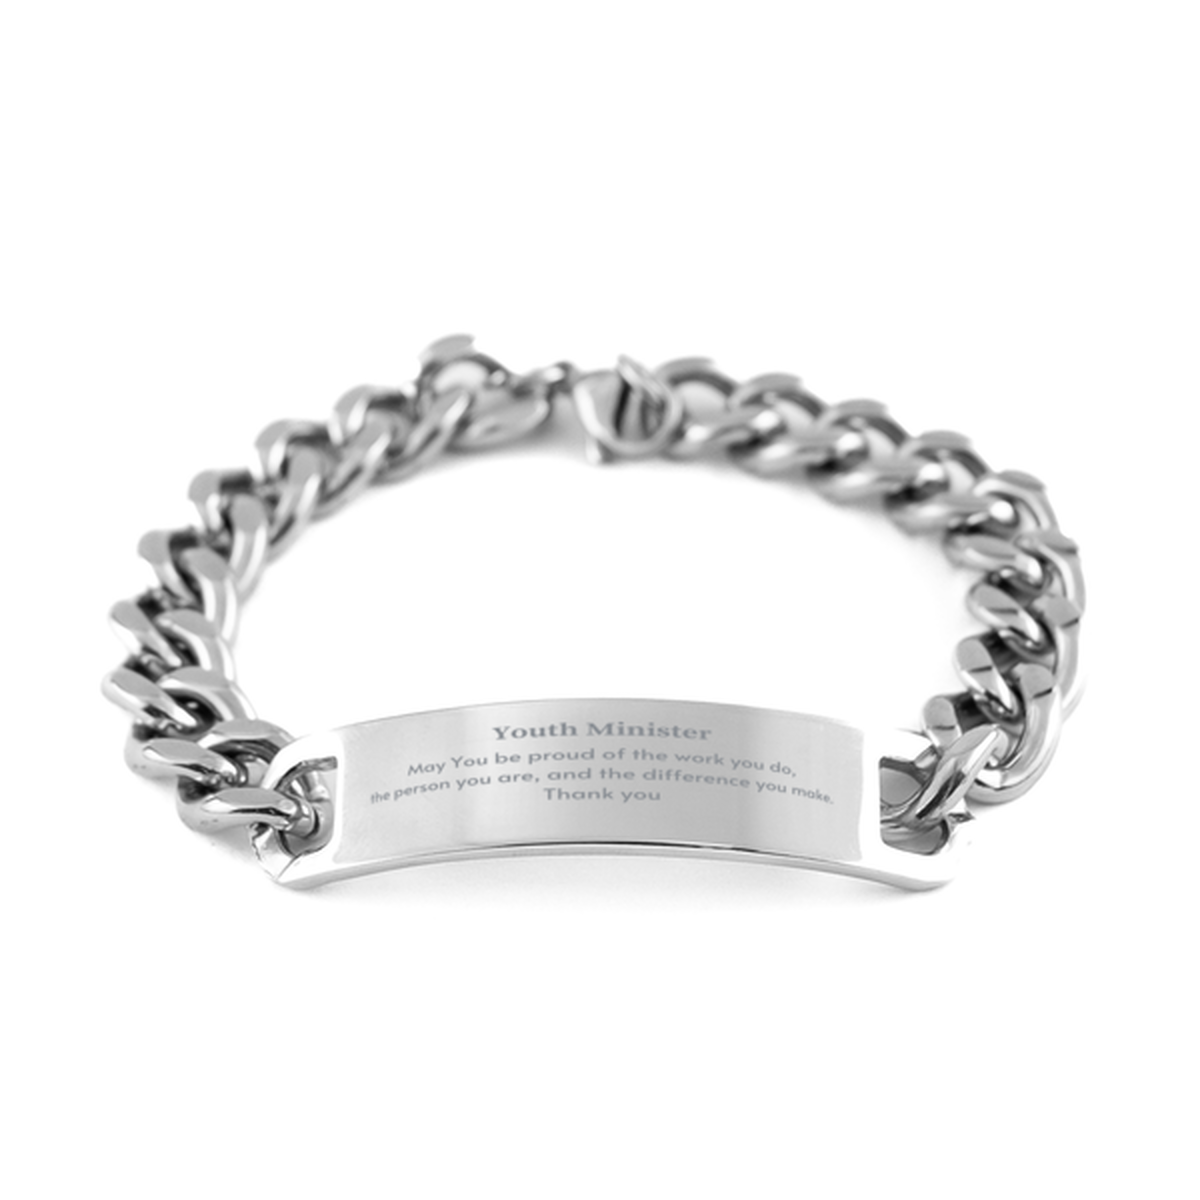 Heartwarming Cuban Chain Stainless Steel Bracelet Retirement Coworkers Gifts for Youth Minister, Youth Minister May You be proud of the work you do, the person you are Gifts for Boss Men Women Friends